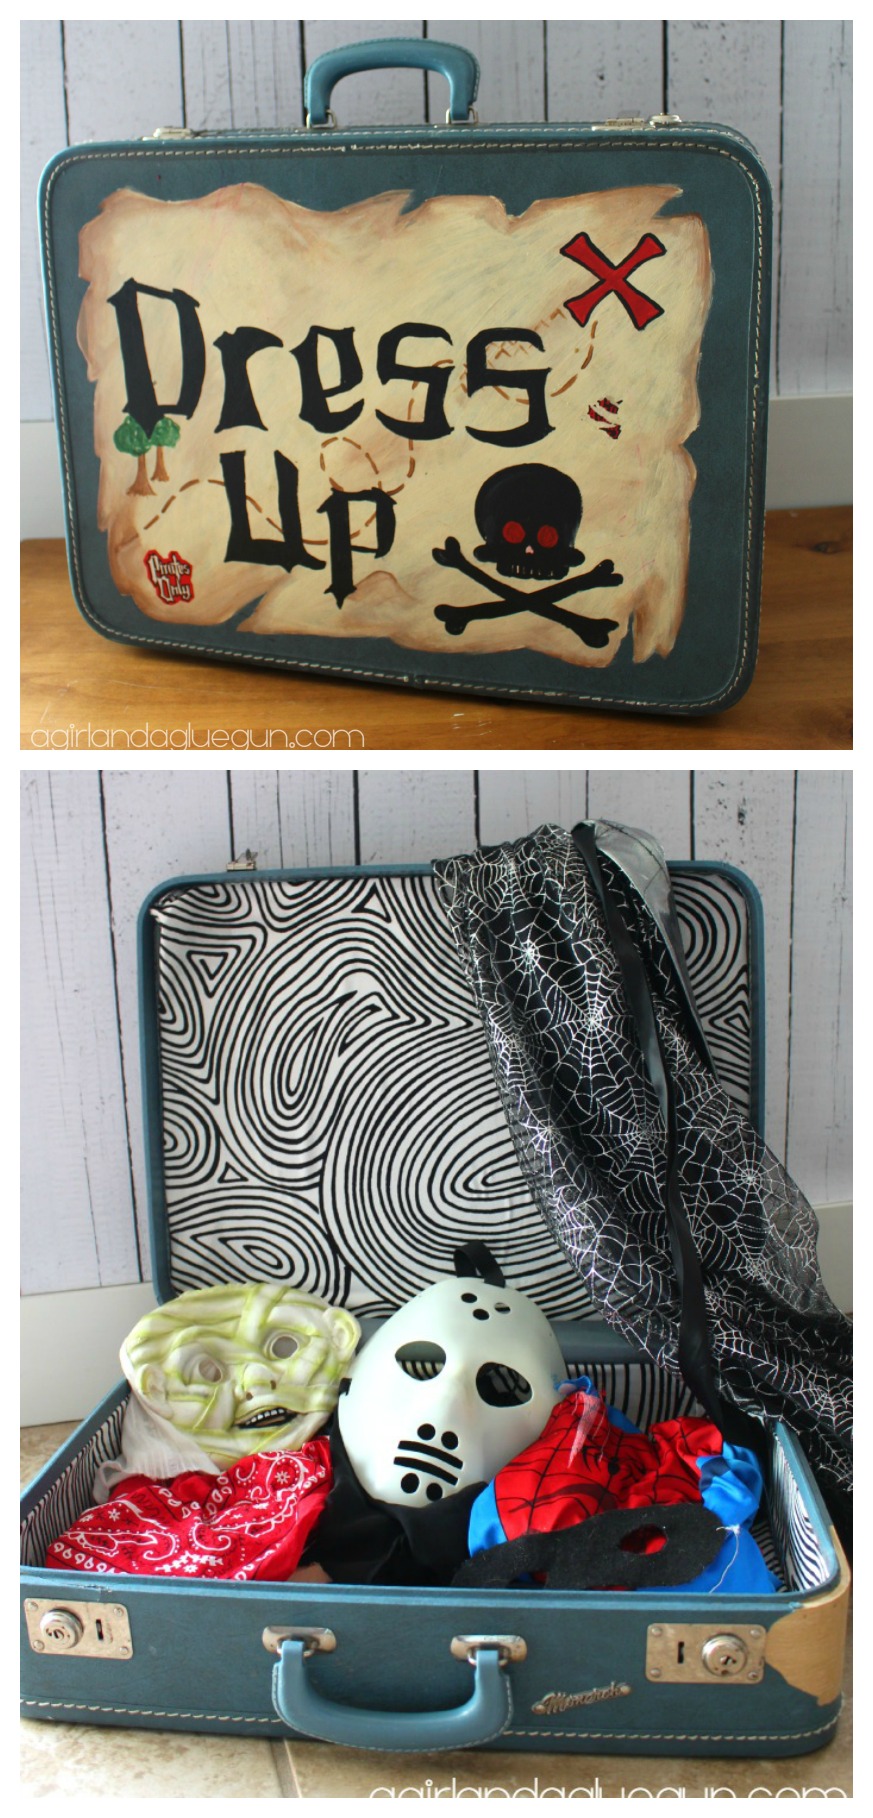 Dress Up Trunk From Old Suitcase - DIY Dress Up Solutions on www.kidslovedressup.com